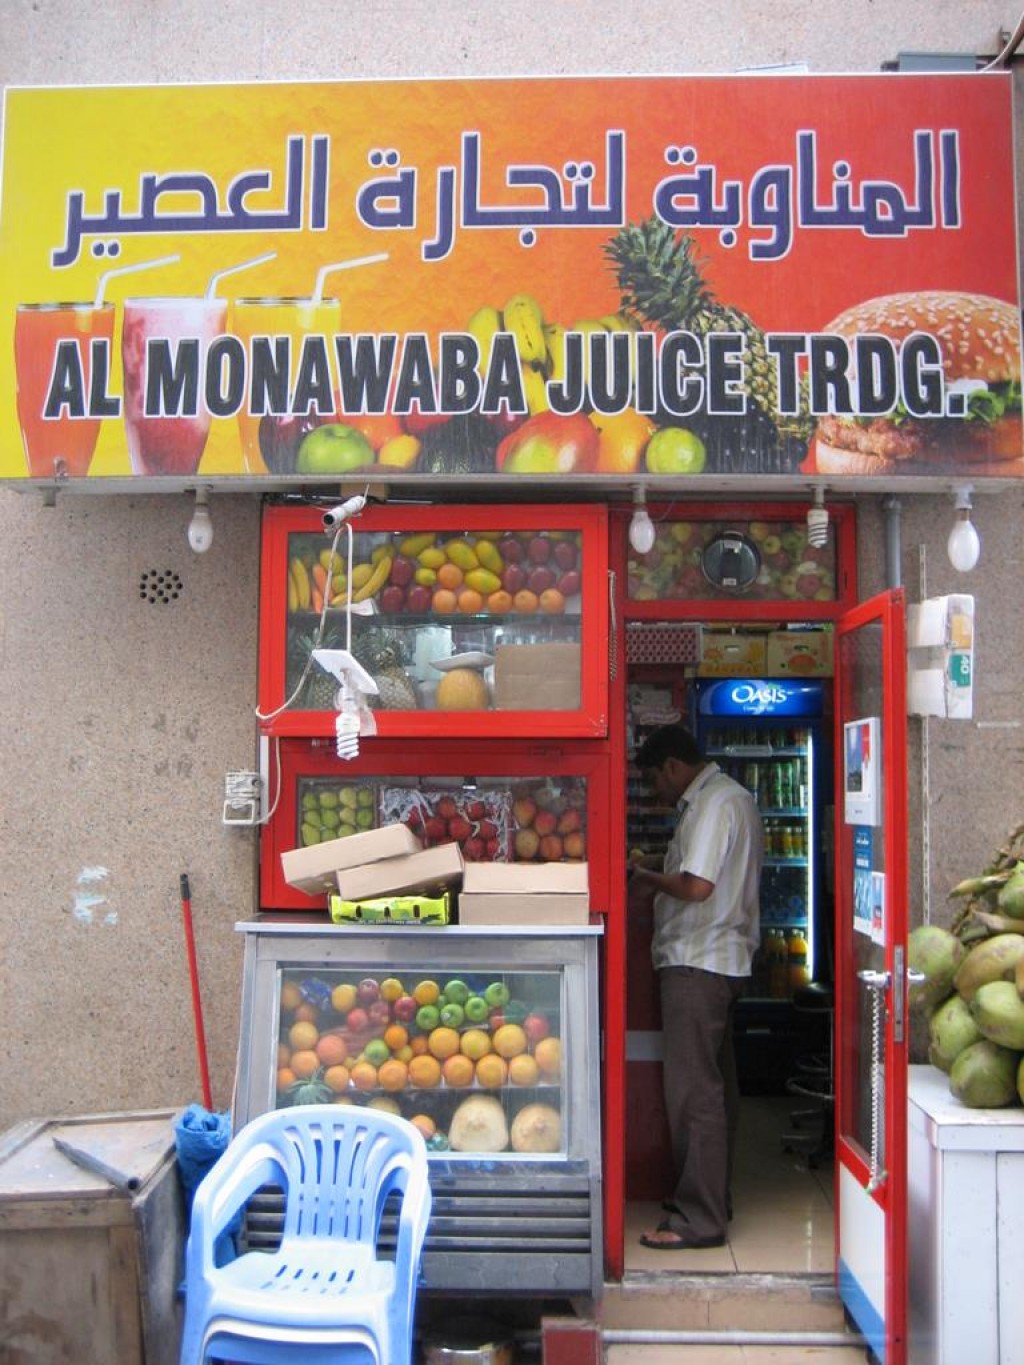 Just round the corner from our hotel, the best juice shack in all of Dubai, the Al Monawaba Juice Trading store.  Try mixing pomegranate and strawberry.  It was AWESOME.